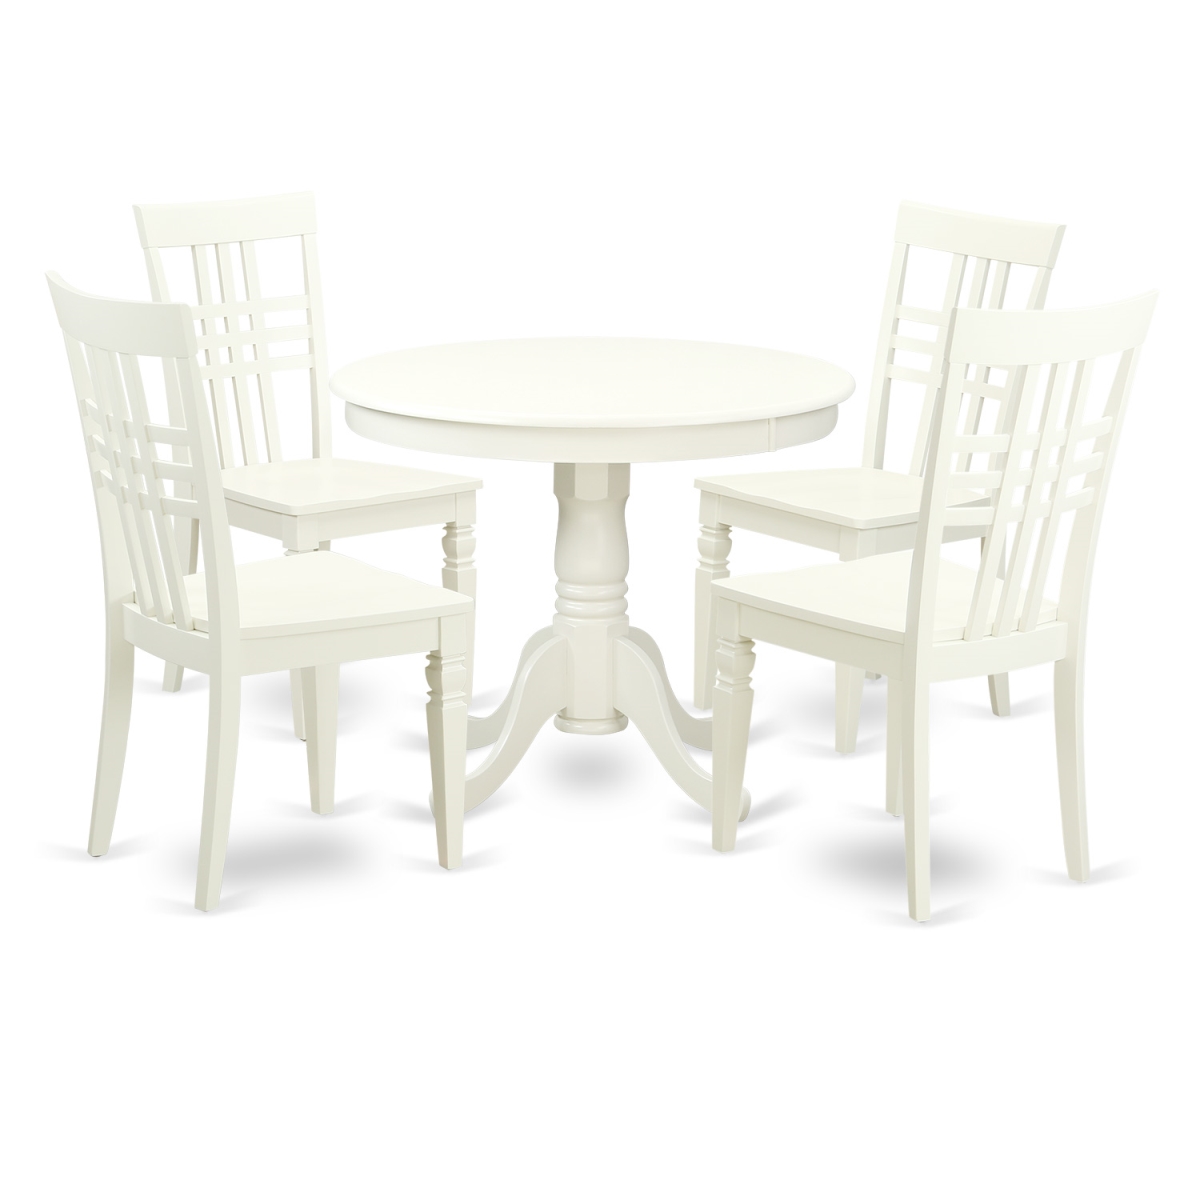 Picture of East West Furniture ANLG5-LWH-W Dining Set - One Table & 4 Wood Seat Chairs, Linen White - 5 Piece